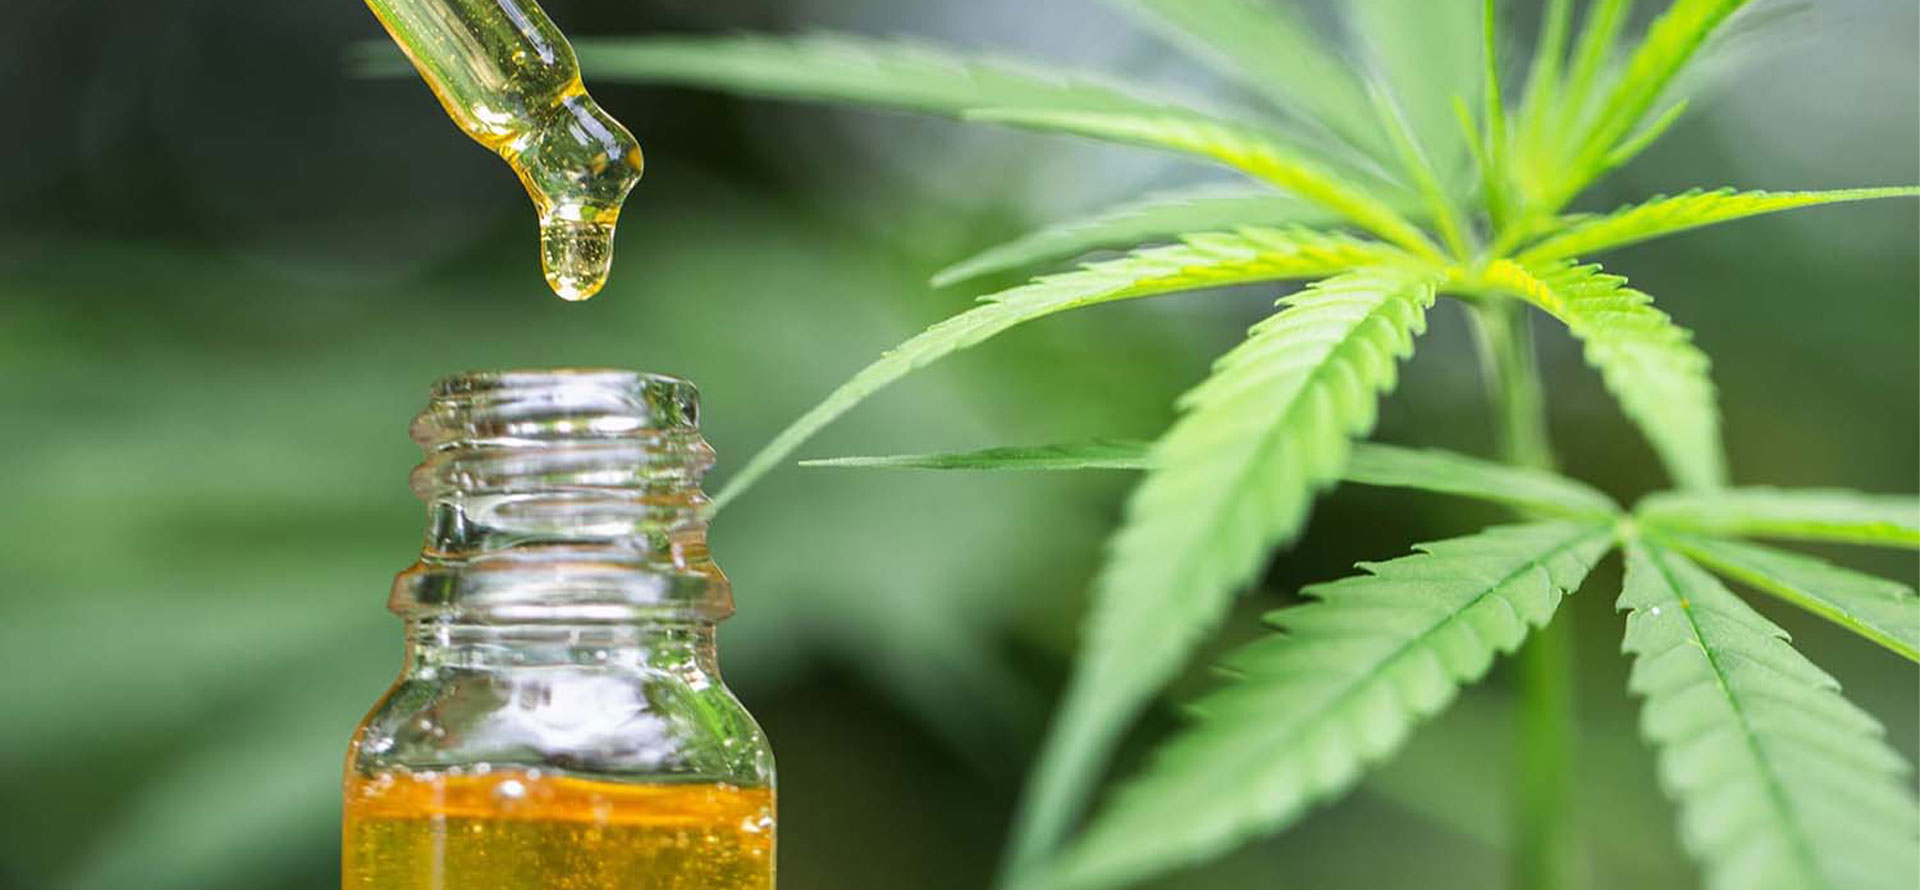 CBC OIL AND HEART RACING - Cbd|Oil|Benefits|Cbc|Effects|Pain|Study|Health|Thc|Products|Cannabinoids|Studies|Research|Anxiety|Cannabis|Symptoms|Evidence|People|System|Disease|Treatment|Inflammation|Hemp|Body|Receptors|Disorders|Brain|Plant|Cells|Side|Effect|Blood|Patients|Cancer|Product|Skin|Marijuana|Properties|Cannabidiol|Cannabinoid|Cbd Oil|Cbd Products|Cbc Oil|Side Effects|Endocannabinoid System|Chronic Pain|Multiple Sclerosis|Pain Relief|Cannabis Plant|Cbd Oil Benefits|Blood Pressure|Health Benefits|High Blood Pressure|Anti-Inflammatory Properties|Neuropathic Pain|Animal Studies|Hemp Plant|Hemp Oil|Anxiety Disorders|Cbd Product|Immune System|Clinical Trials|Cbd Gummies|Nerve Cells|Nervous System|Entourage Effect|Hemp Seed Oil|United States|Cbd Oils|Drug Administration